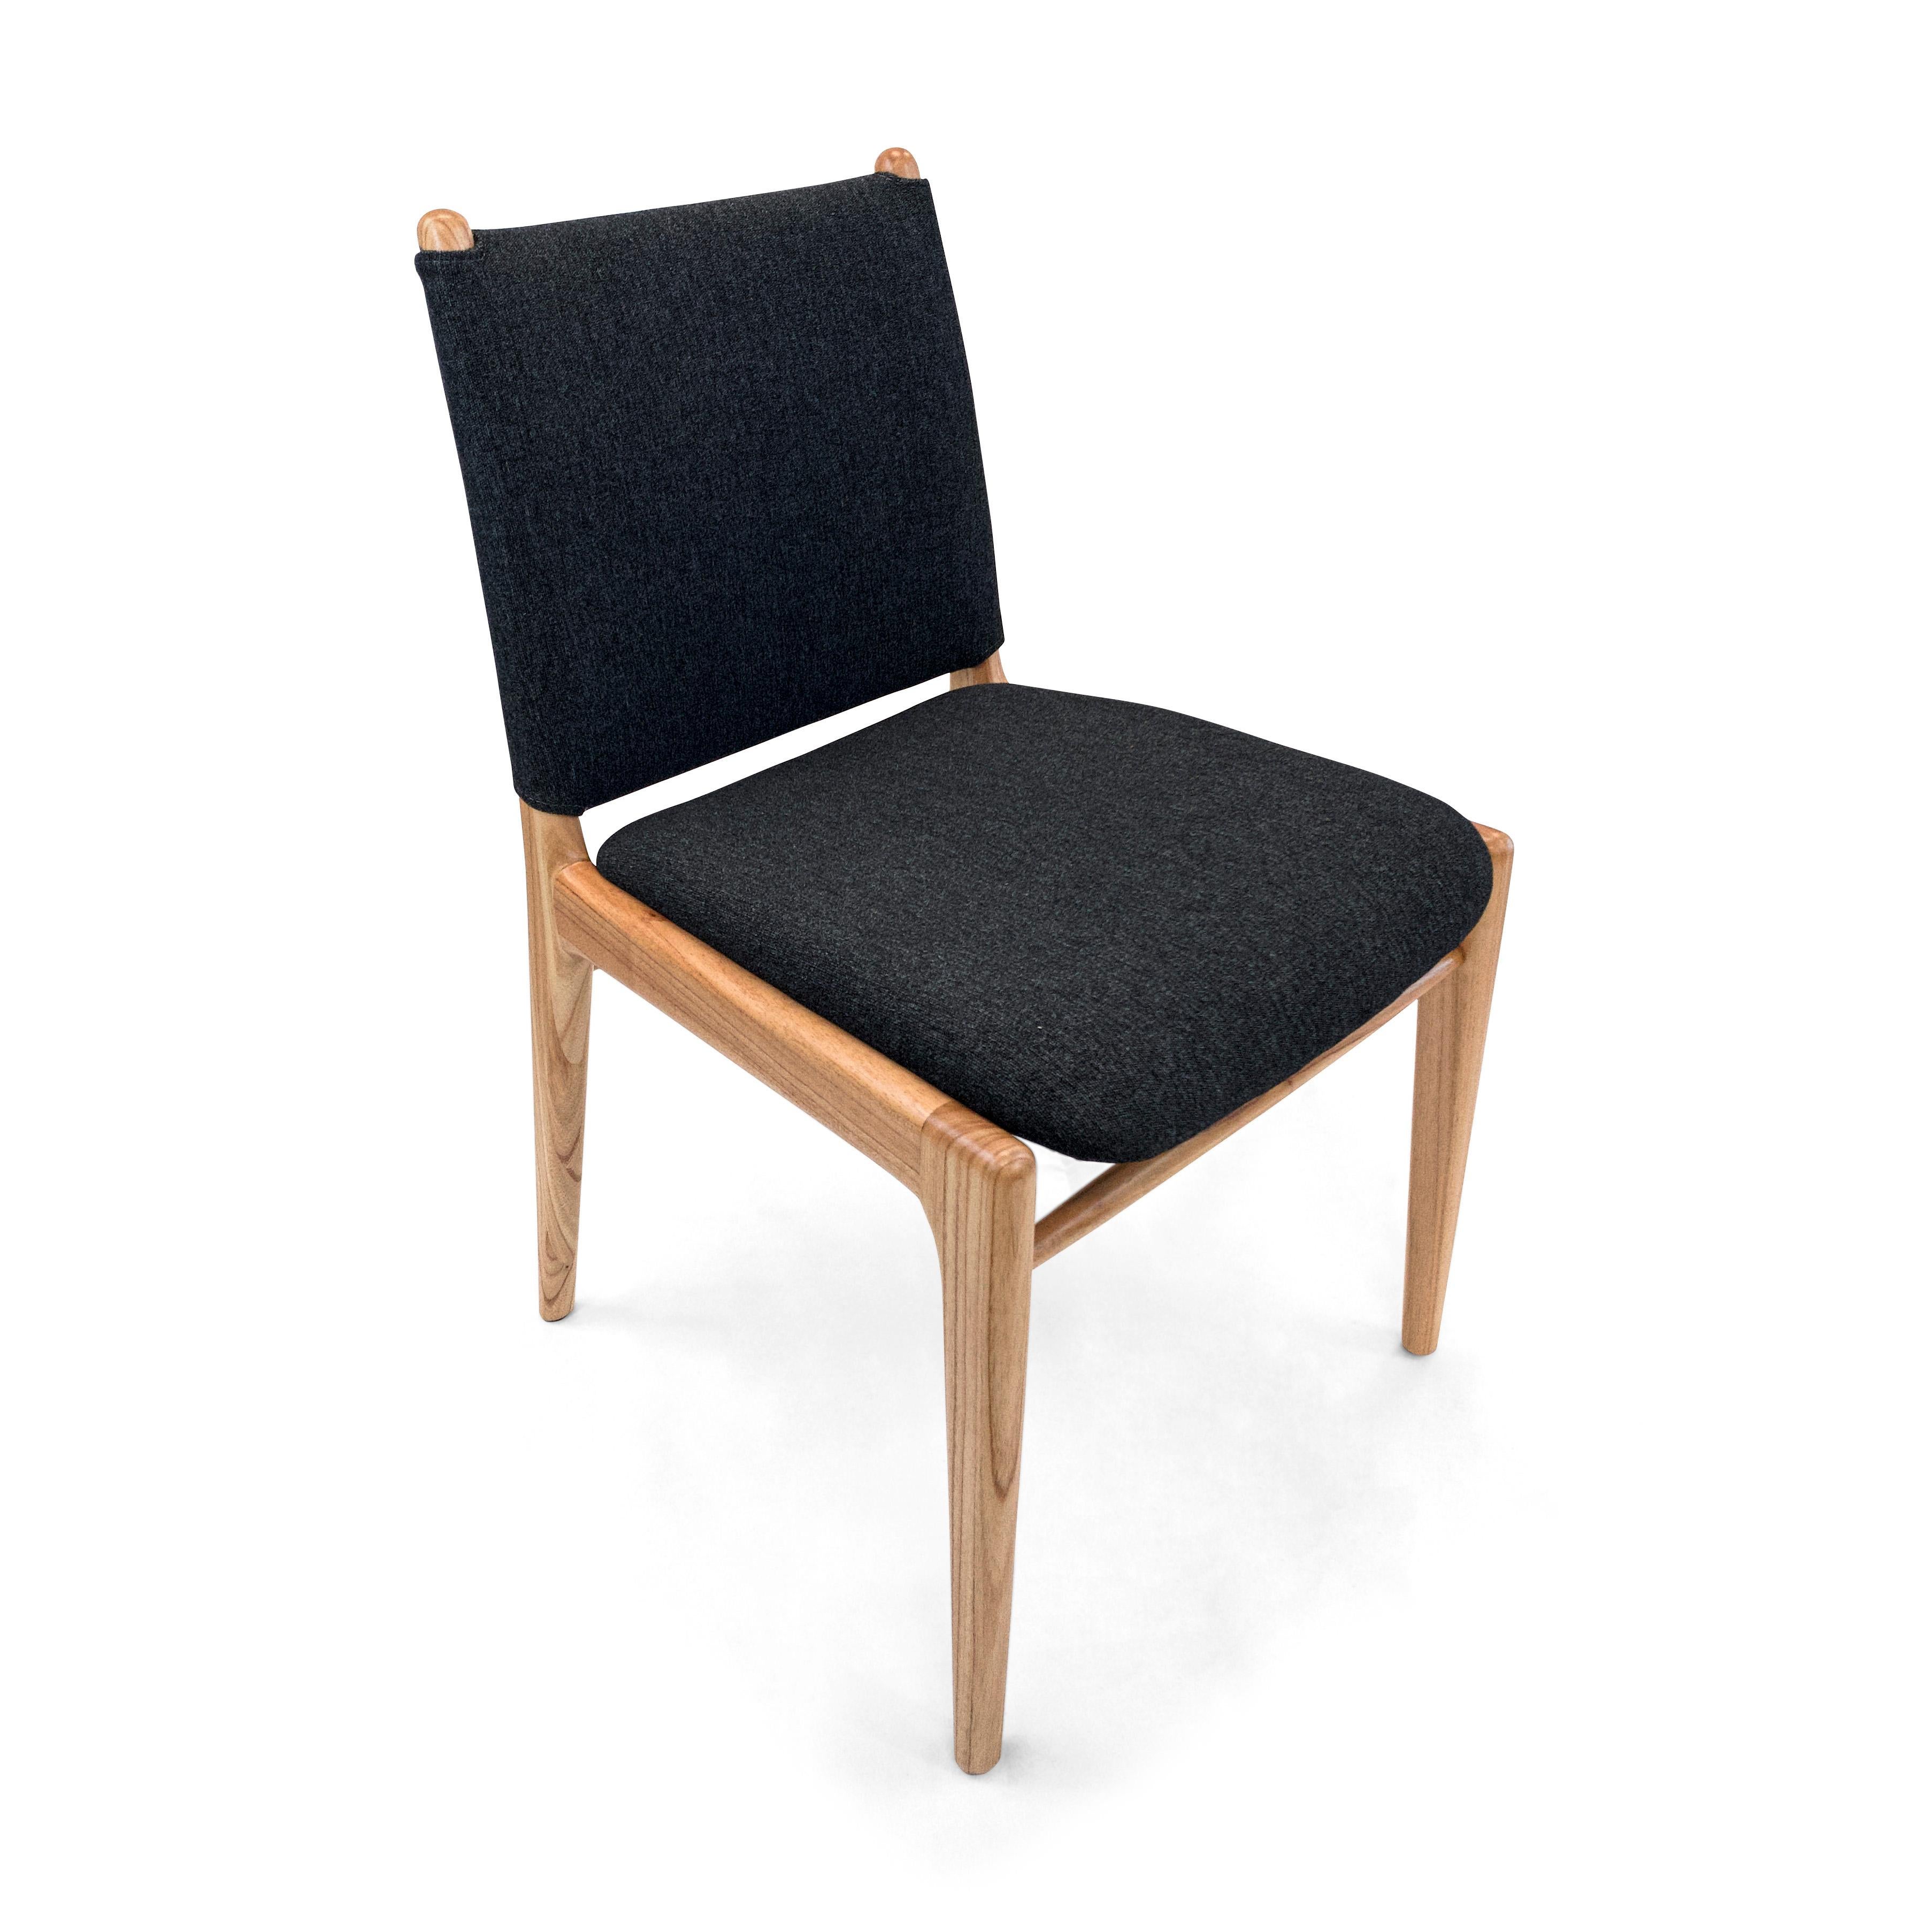 Scandinavian Modern Cappio Dining Chair in Chinaberry Wood Finish with Black Fabric, set of 2 For Sale